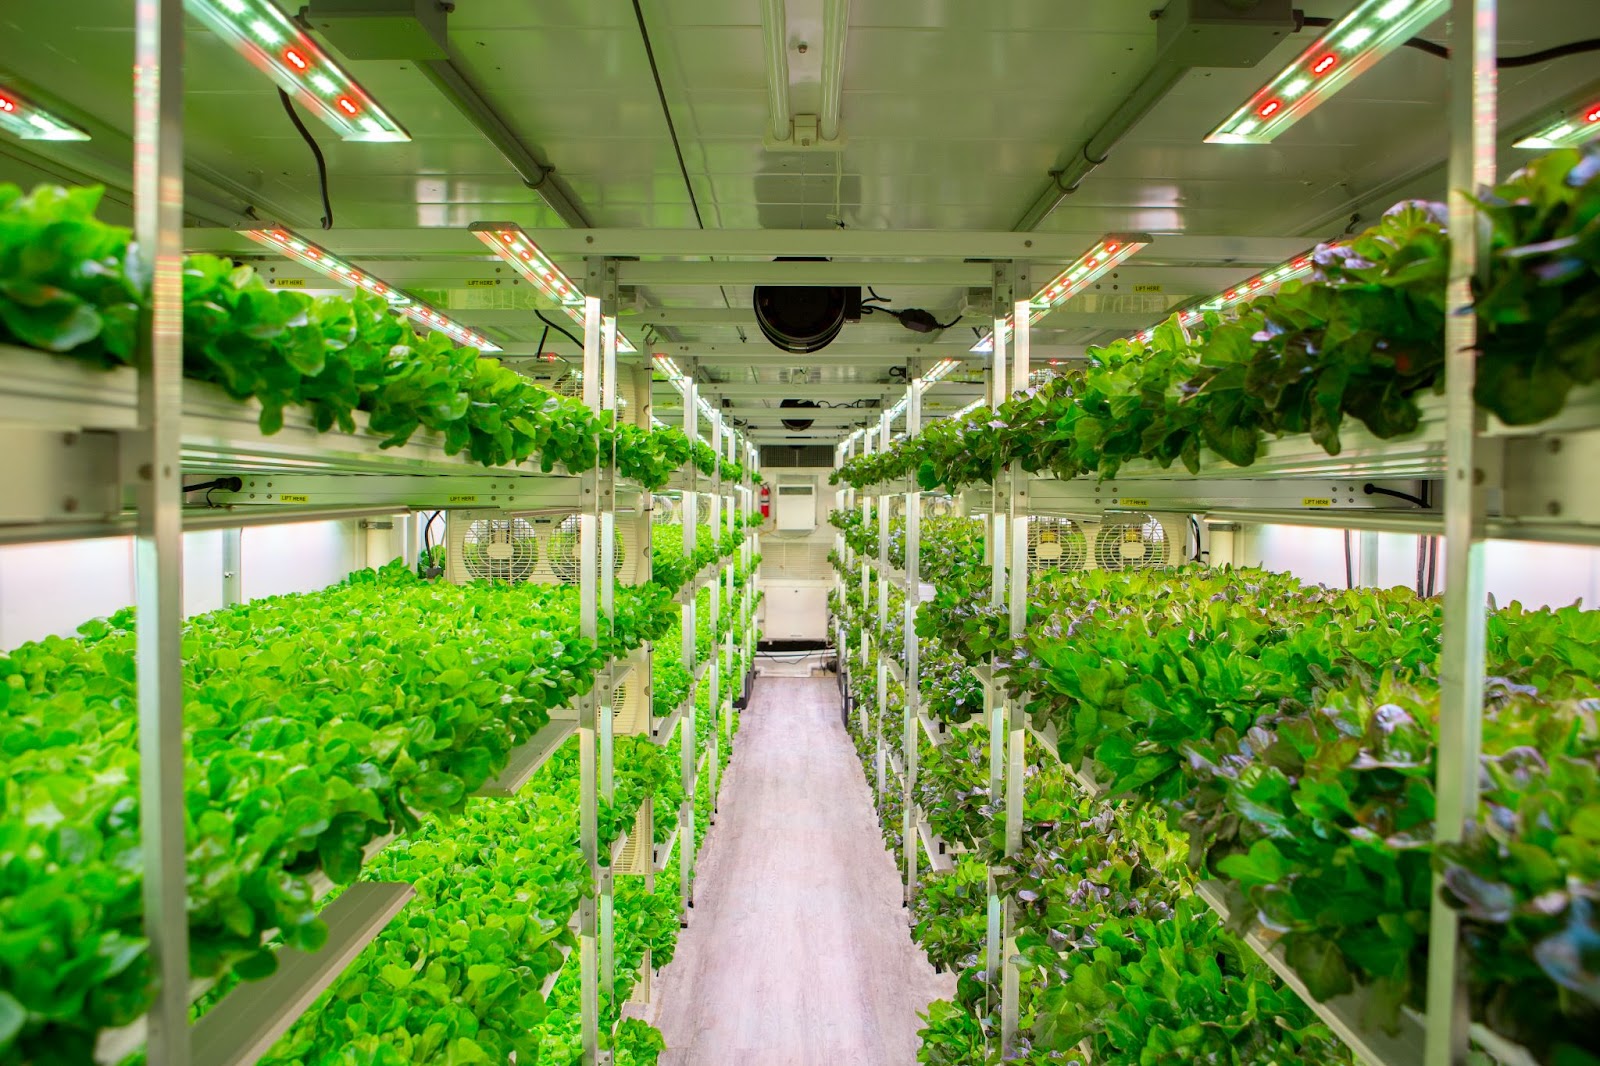 A vertical growing system with fresh leafy greens in an AmplifiedAg modular system